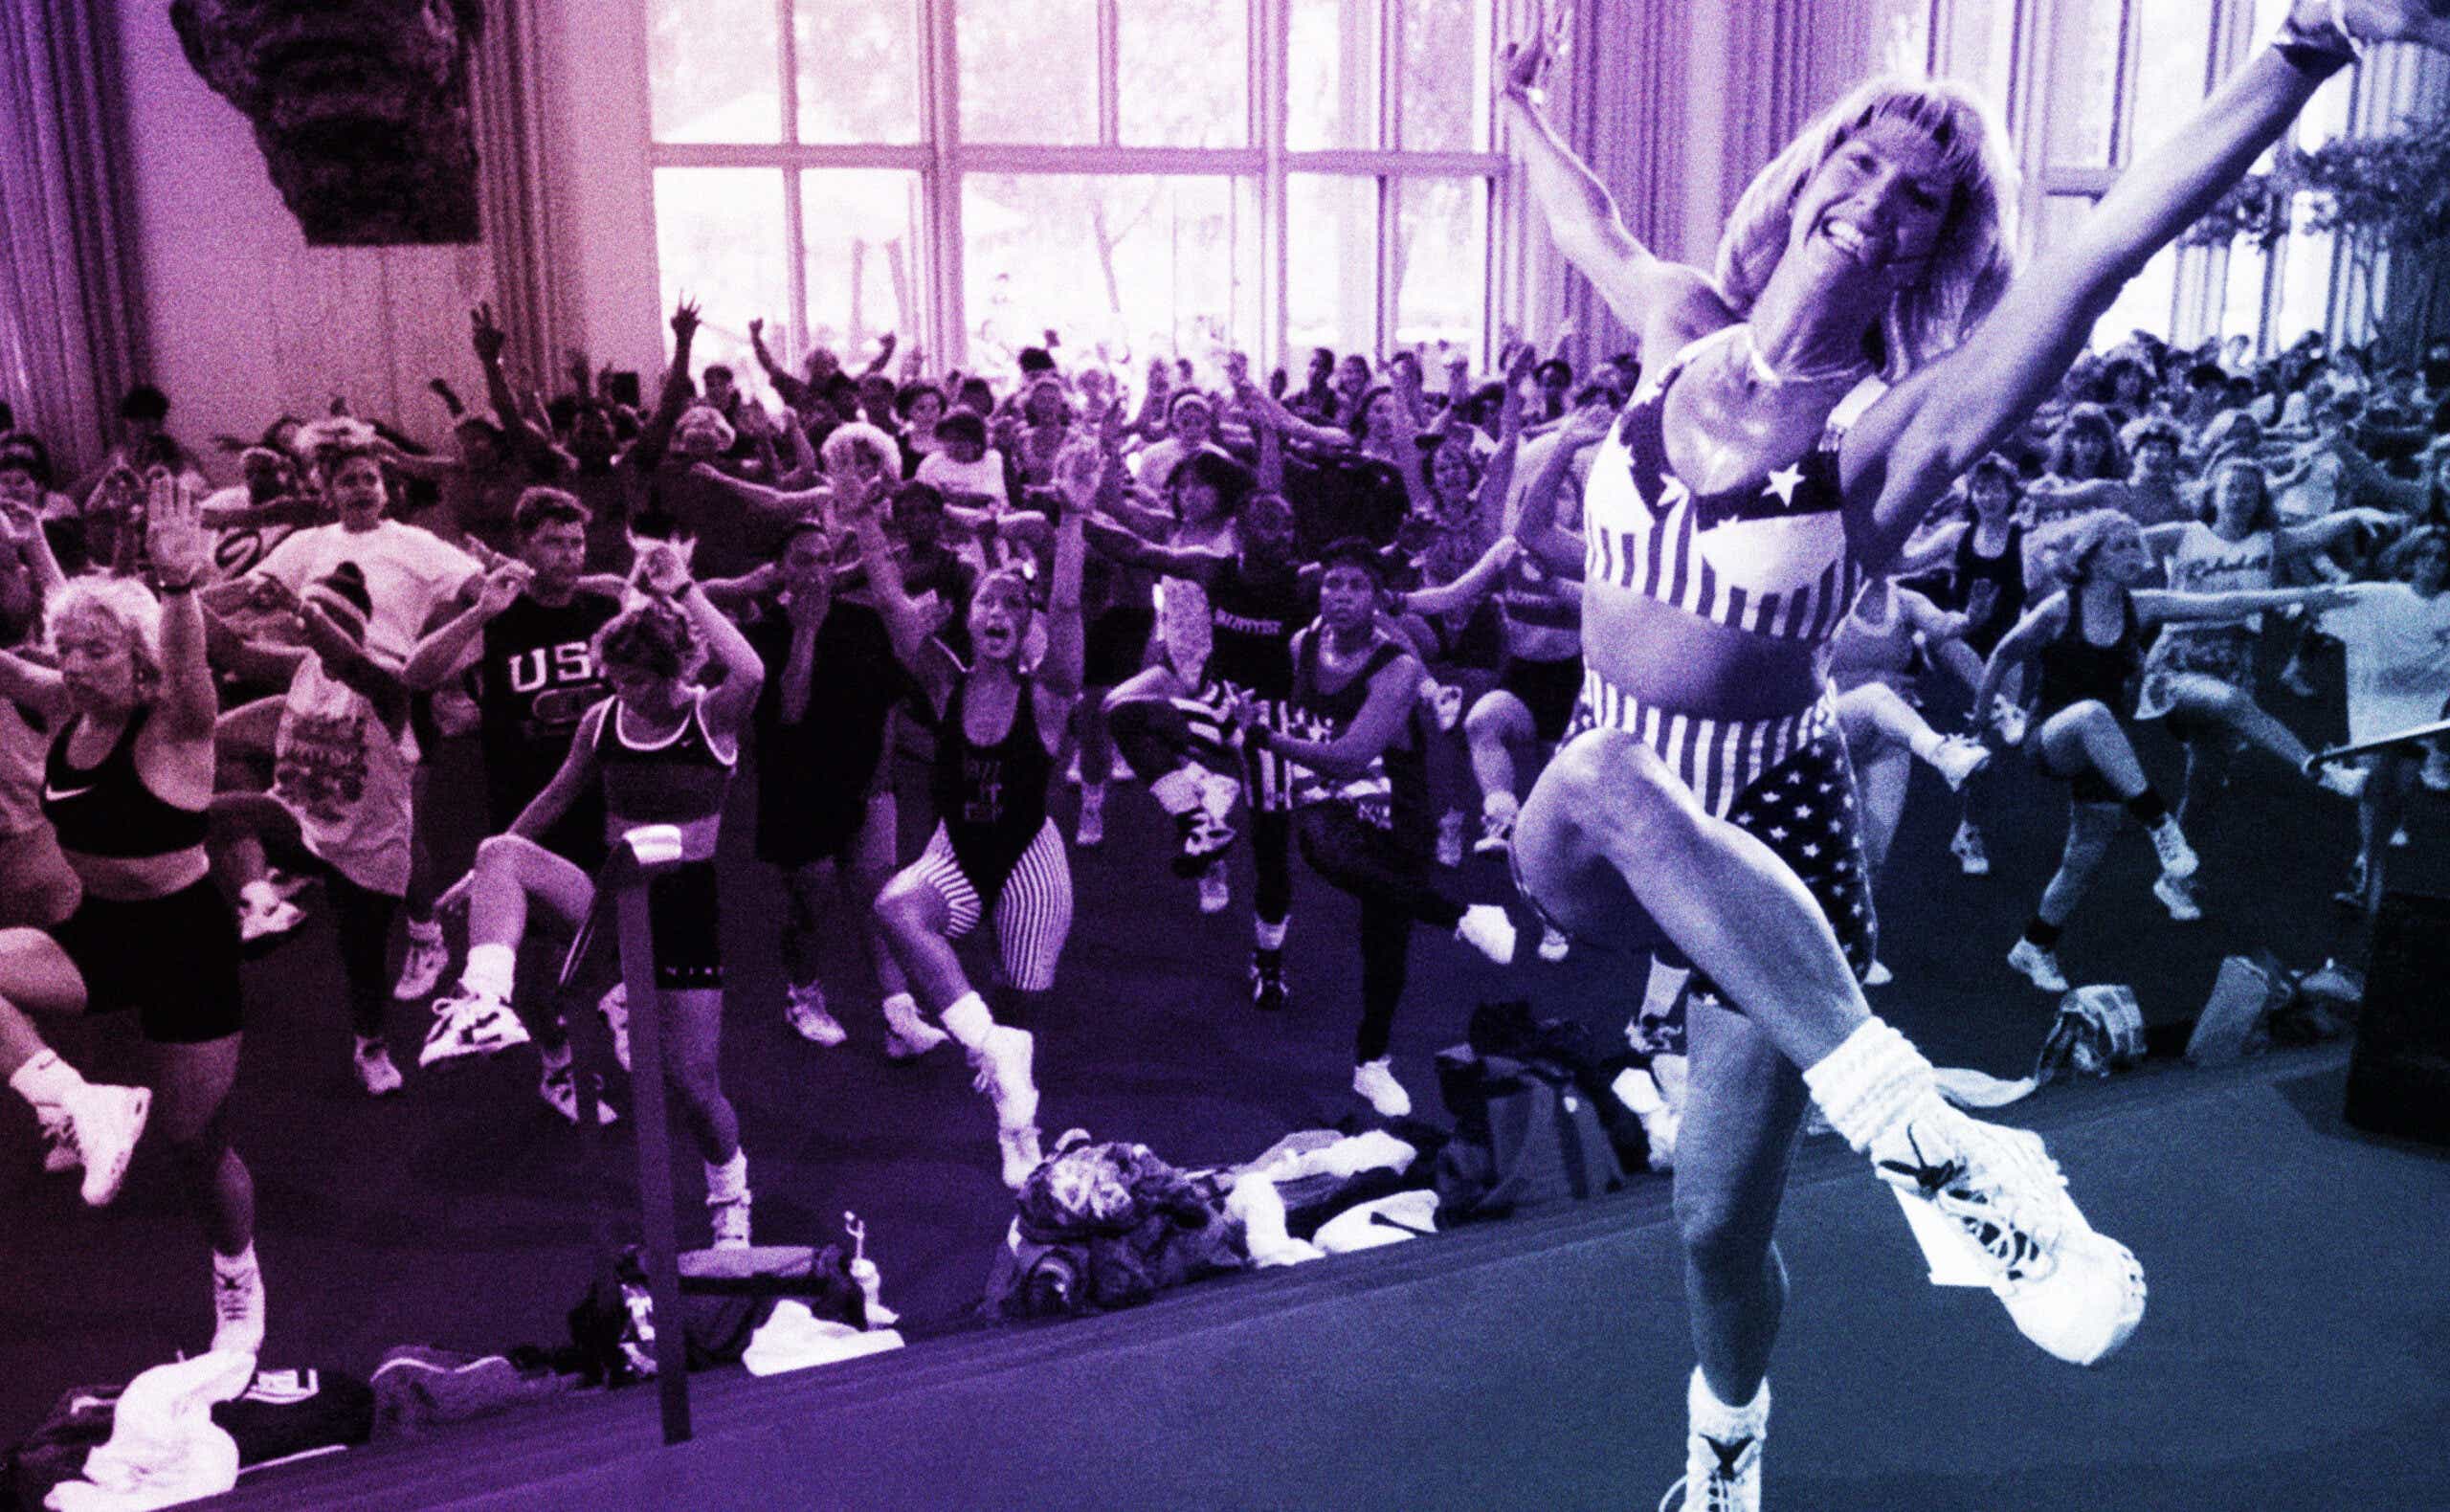 Jazzercise on X: Our favorite gift to give and get?! The original